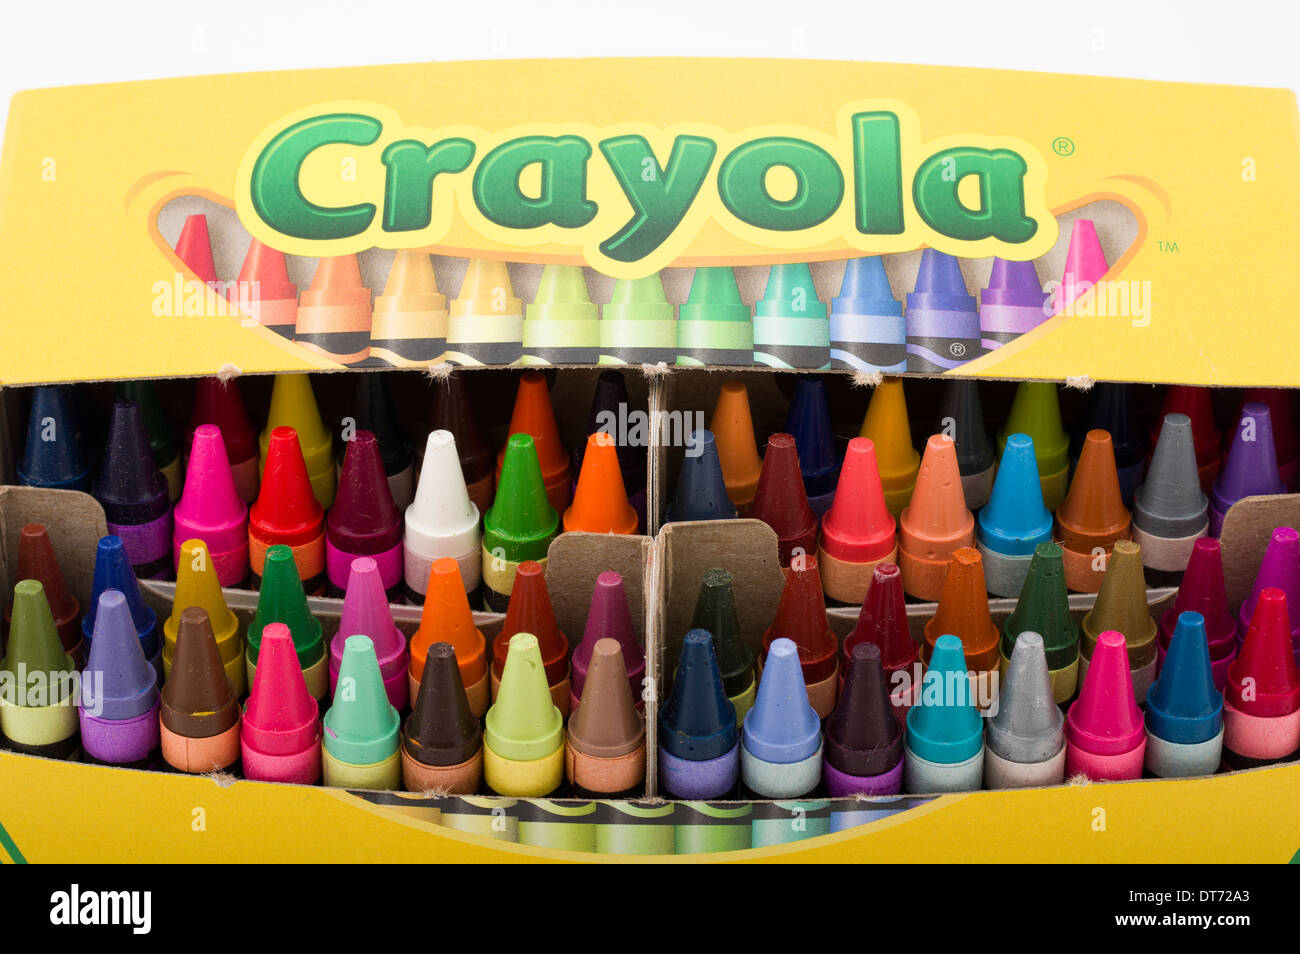 Crayola wax crayons made mostly of petroleum paraffin wax an iconic children's toy Stock Photo